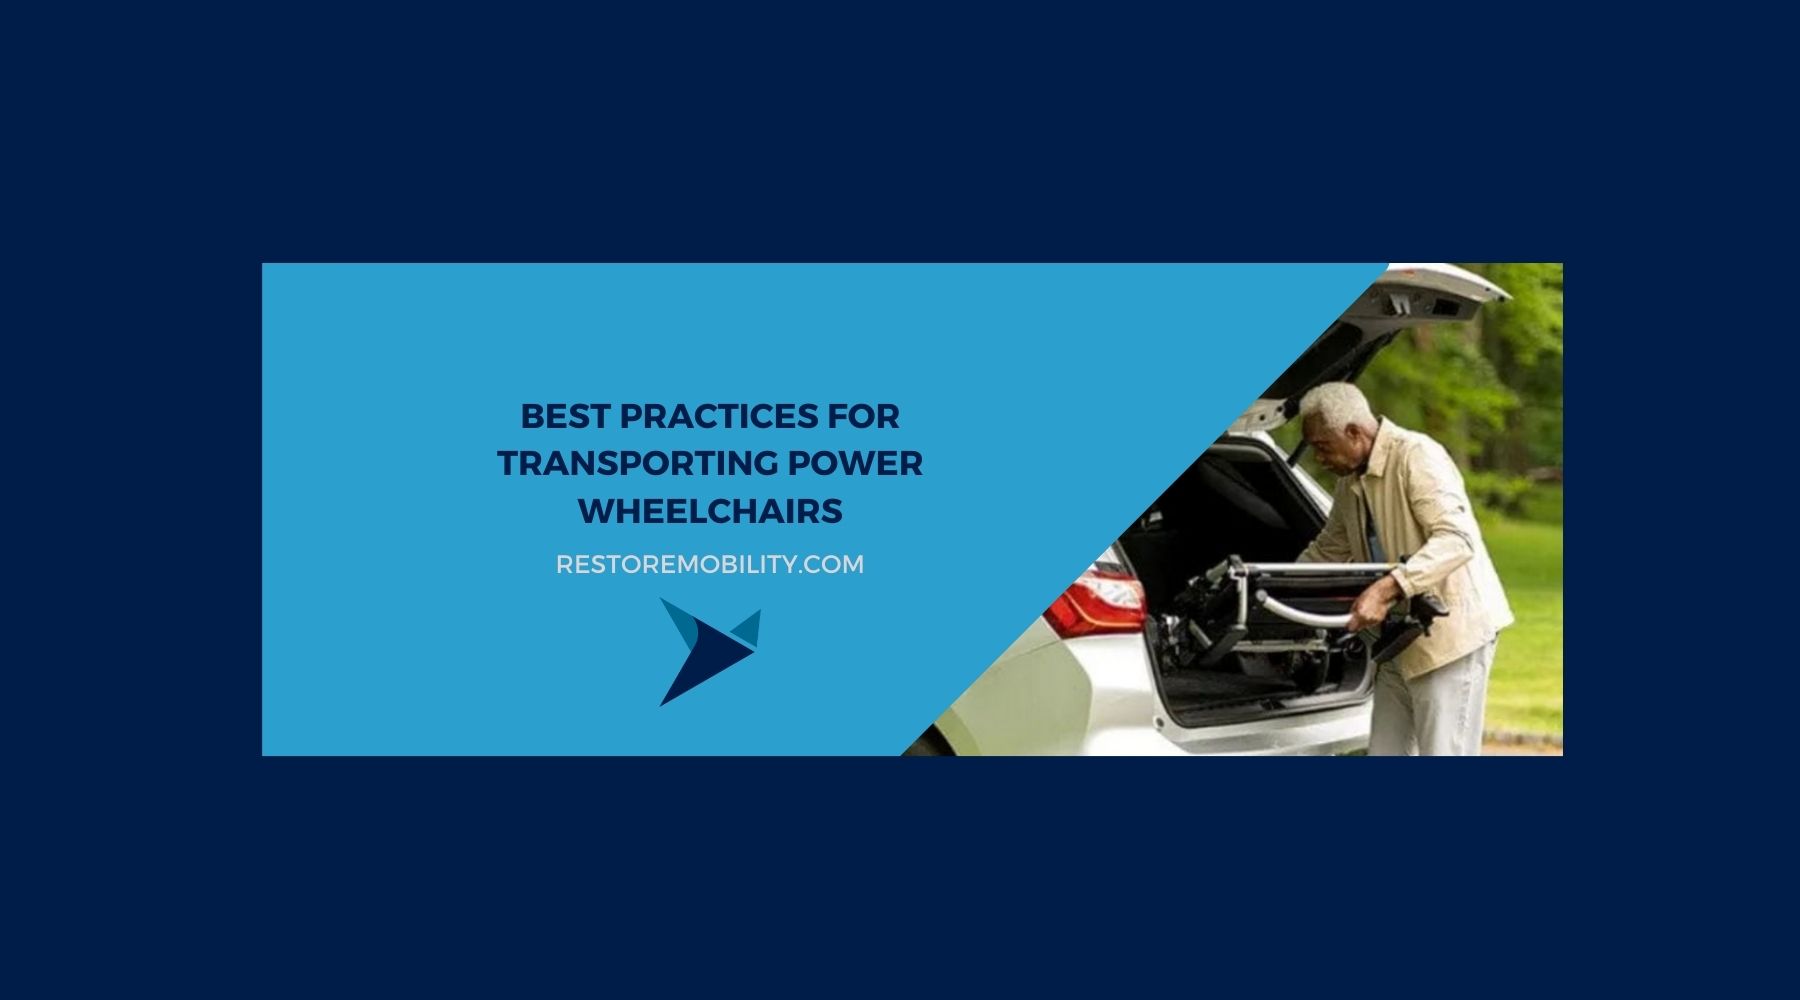 Best Practices for Transporting Power Wheelchairs